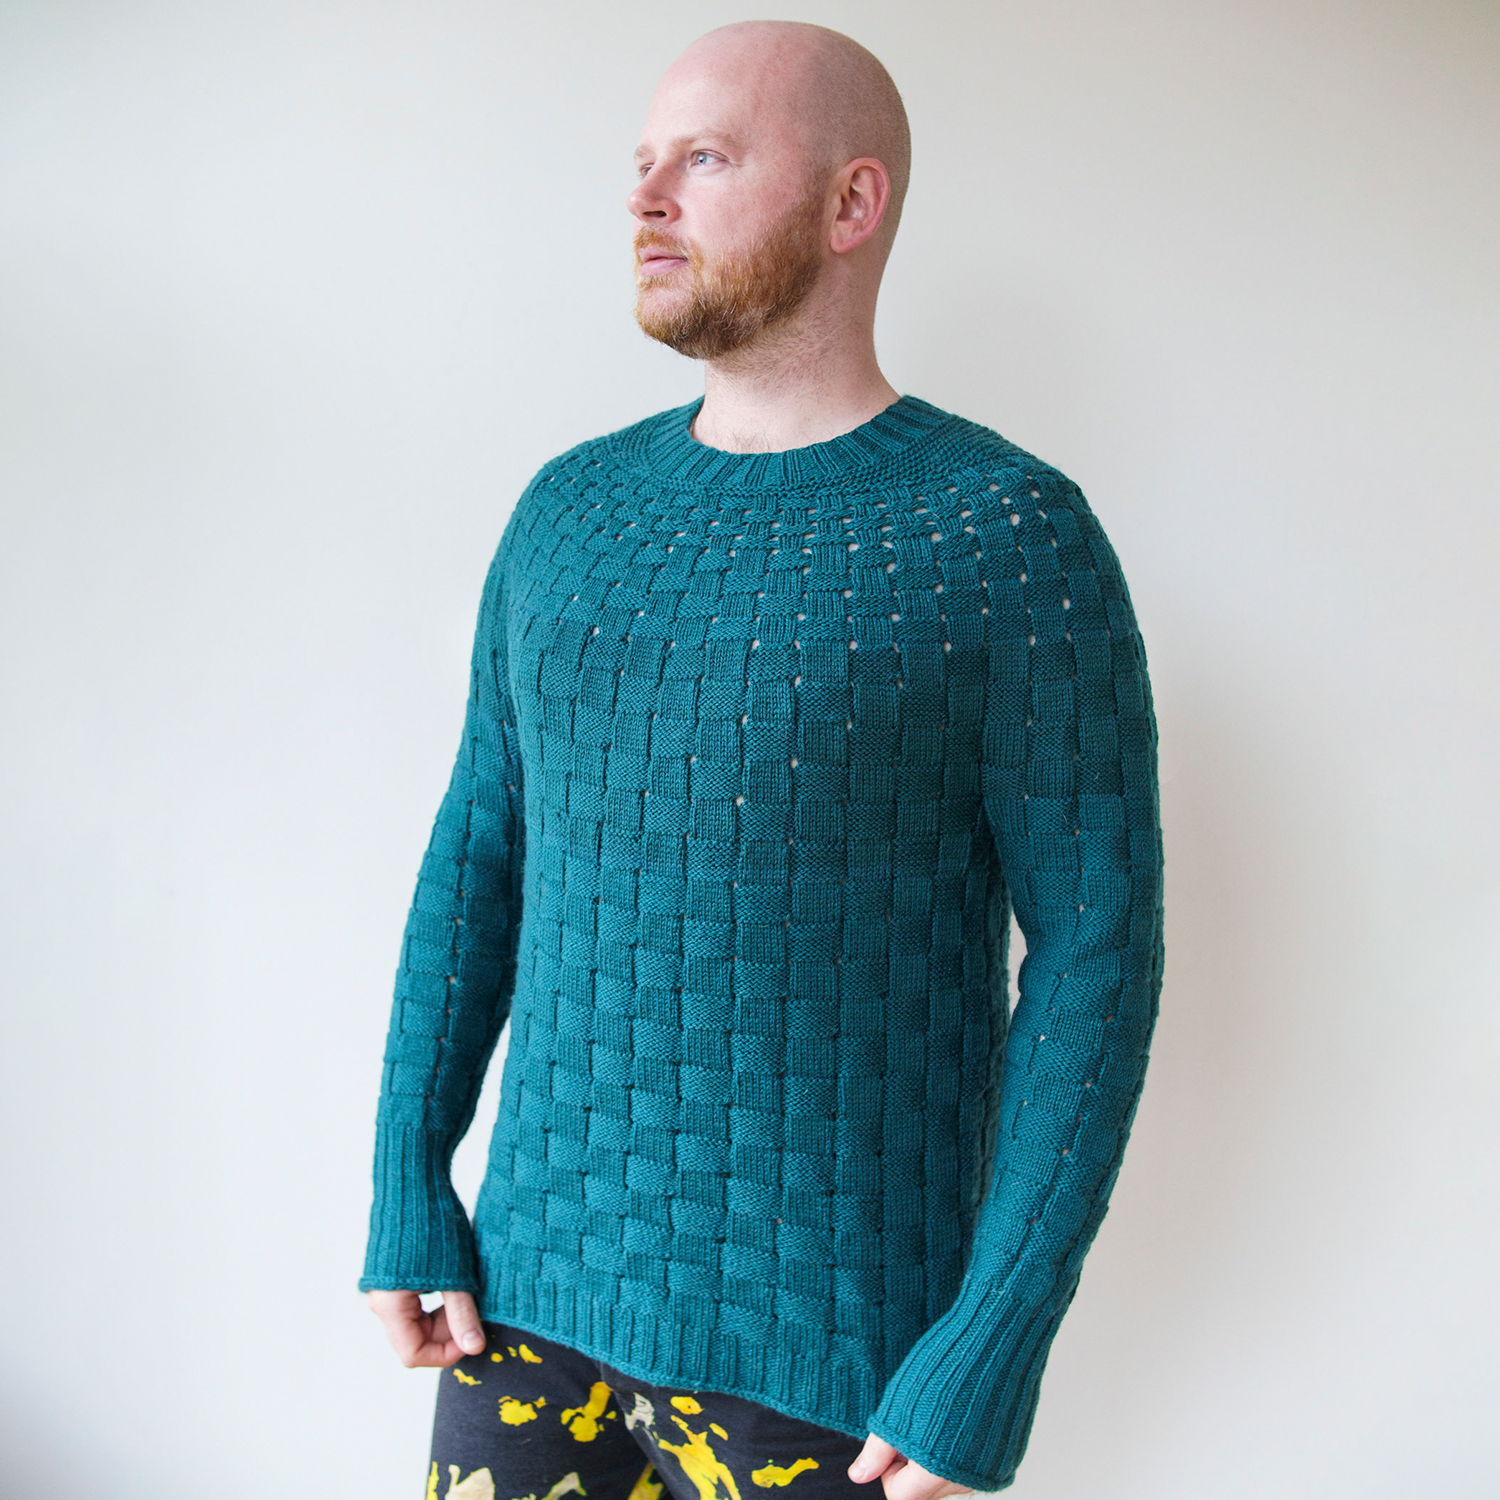 THE BASKETWEAVER SWEATER - CANAL HOUSE